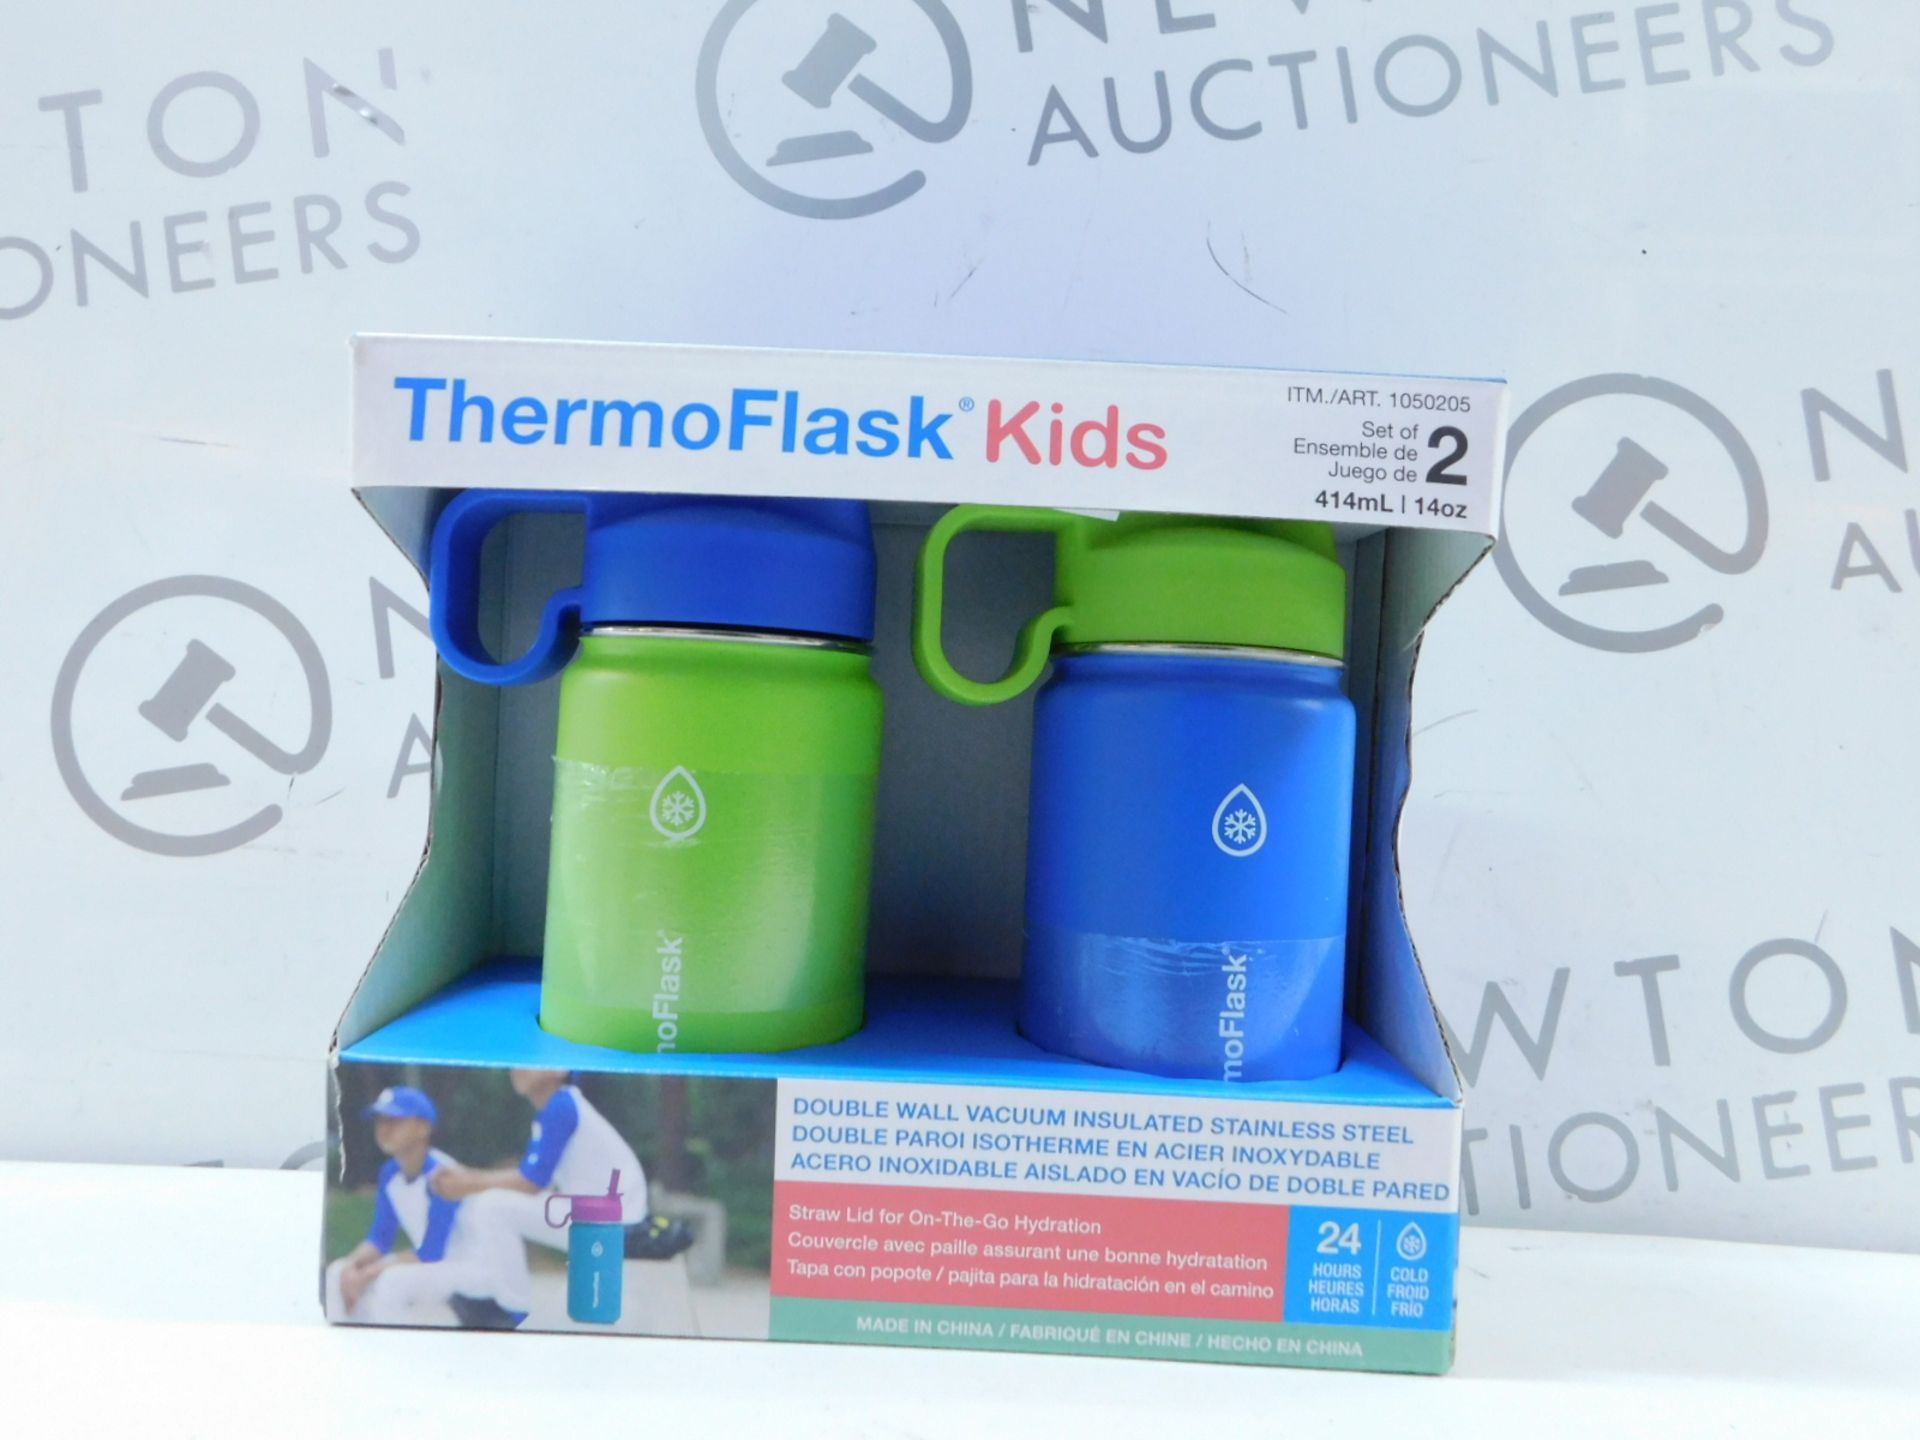 1 BRAND NEW BOXED SET OF 2 THERMOFLASK KIDS DOUBLE WALL VACUUM INSULATED STAINLESS STEEL WATER